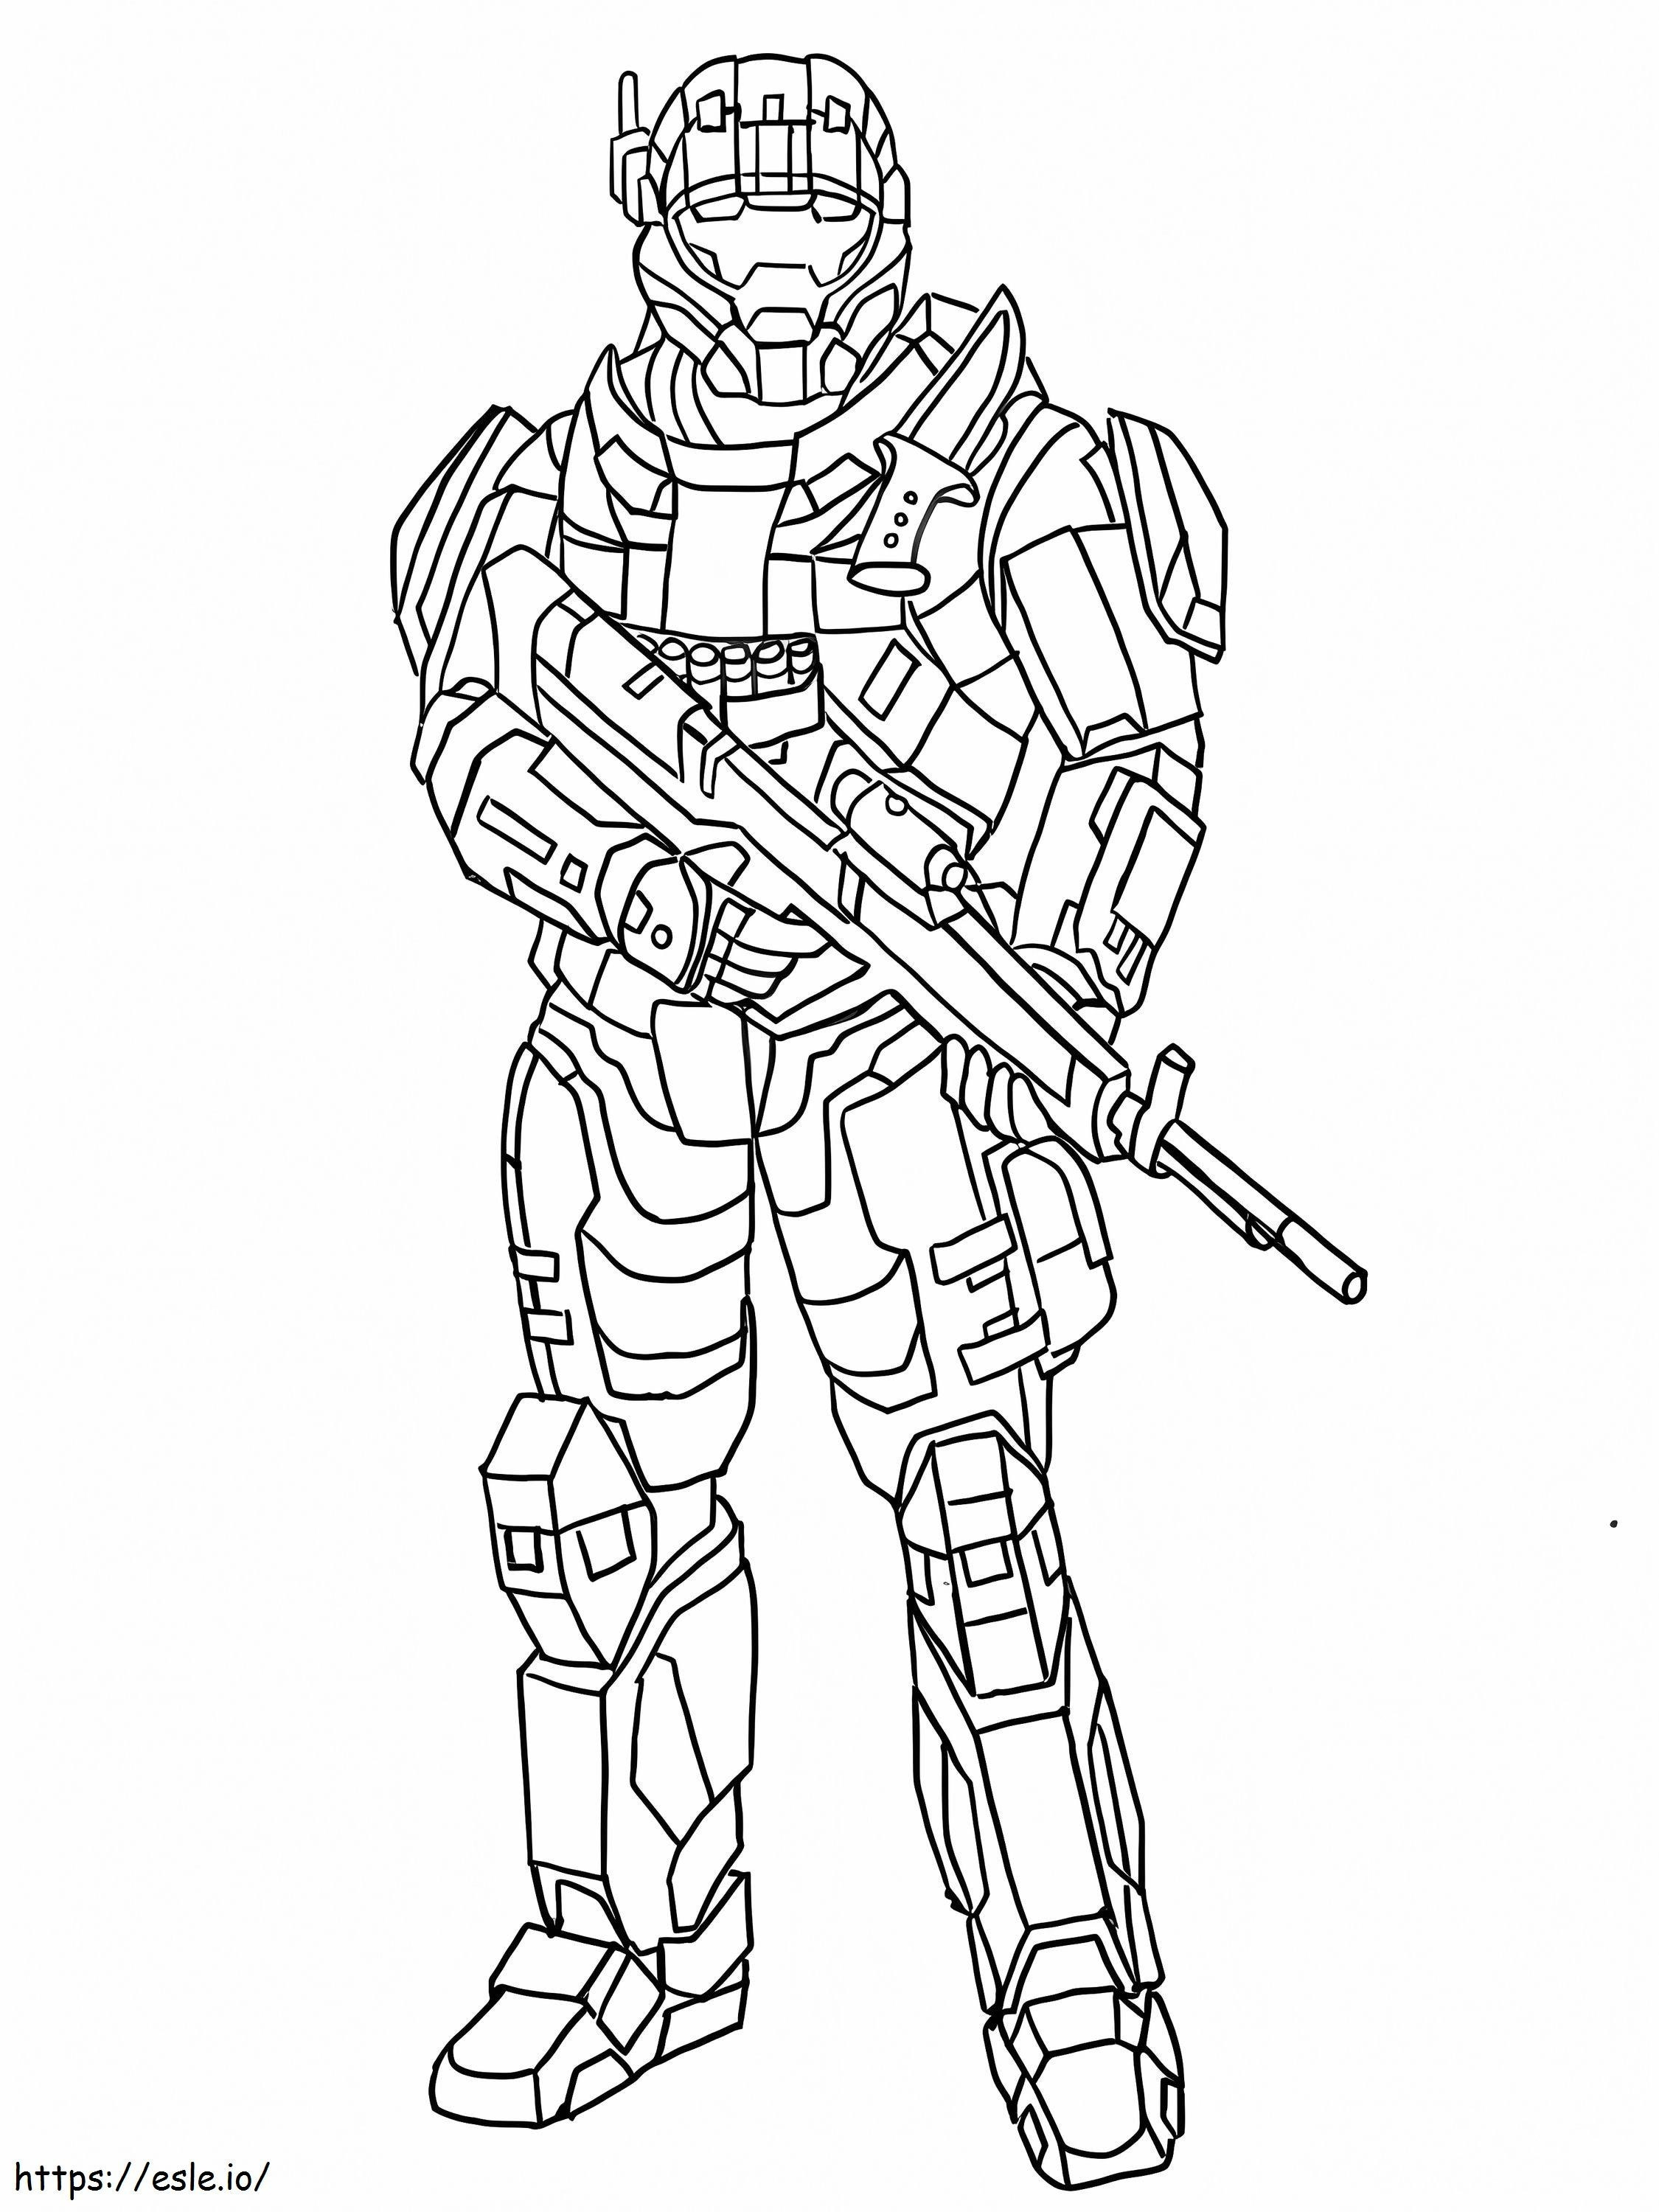 Halo Soldier coloring page